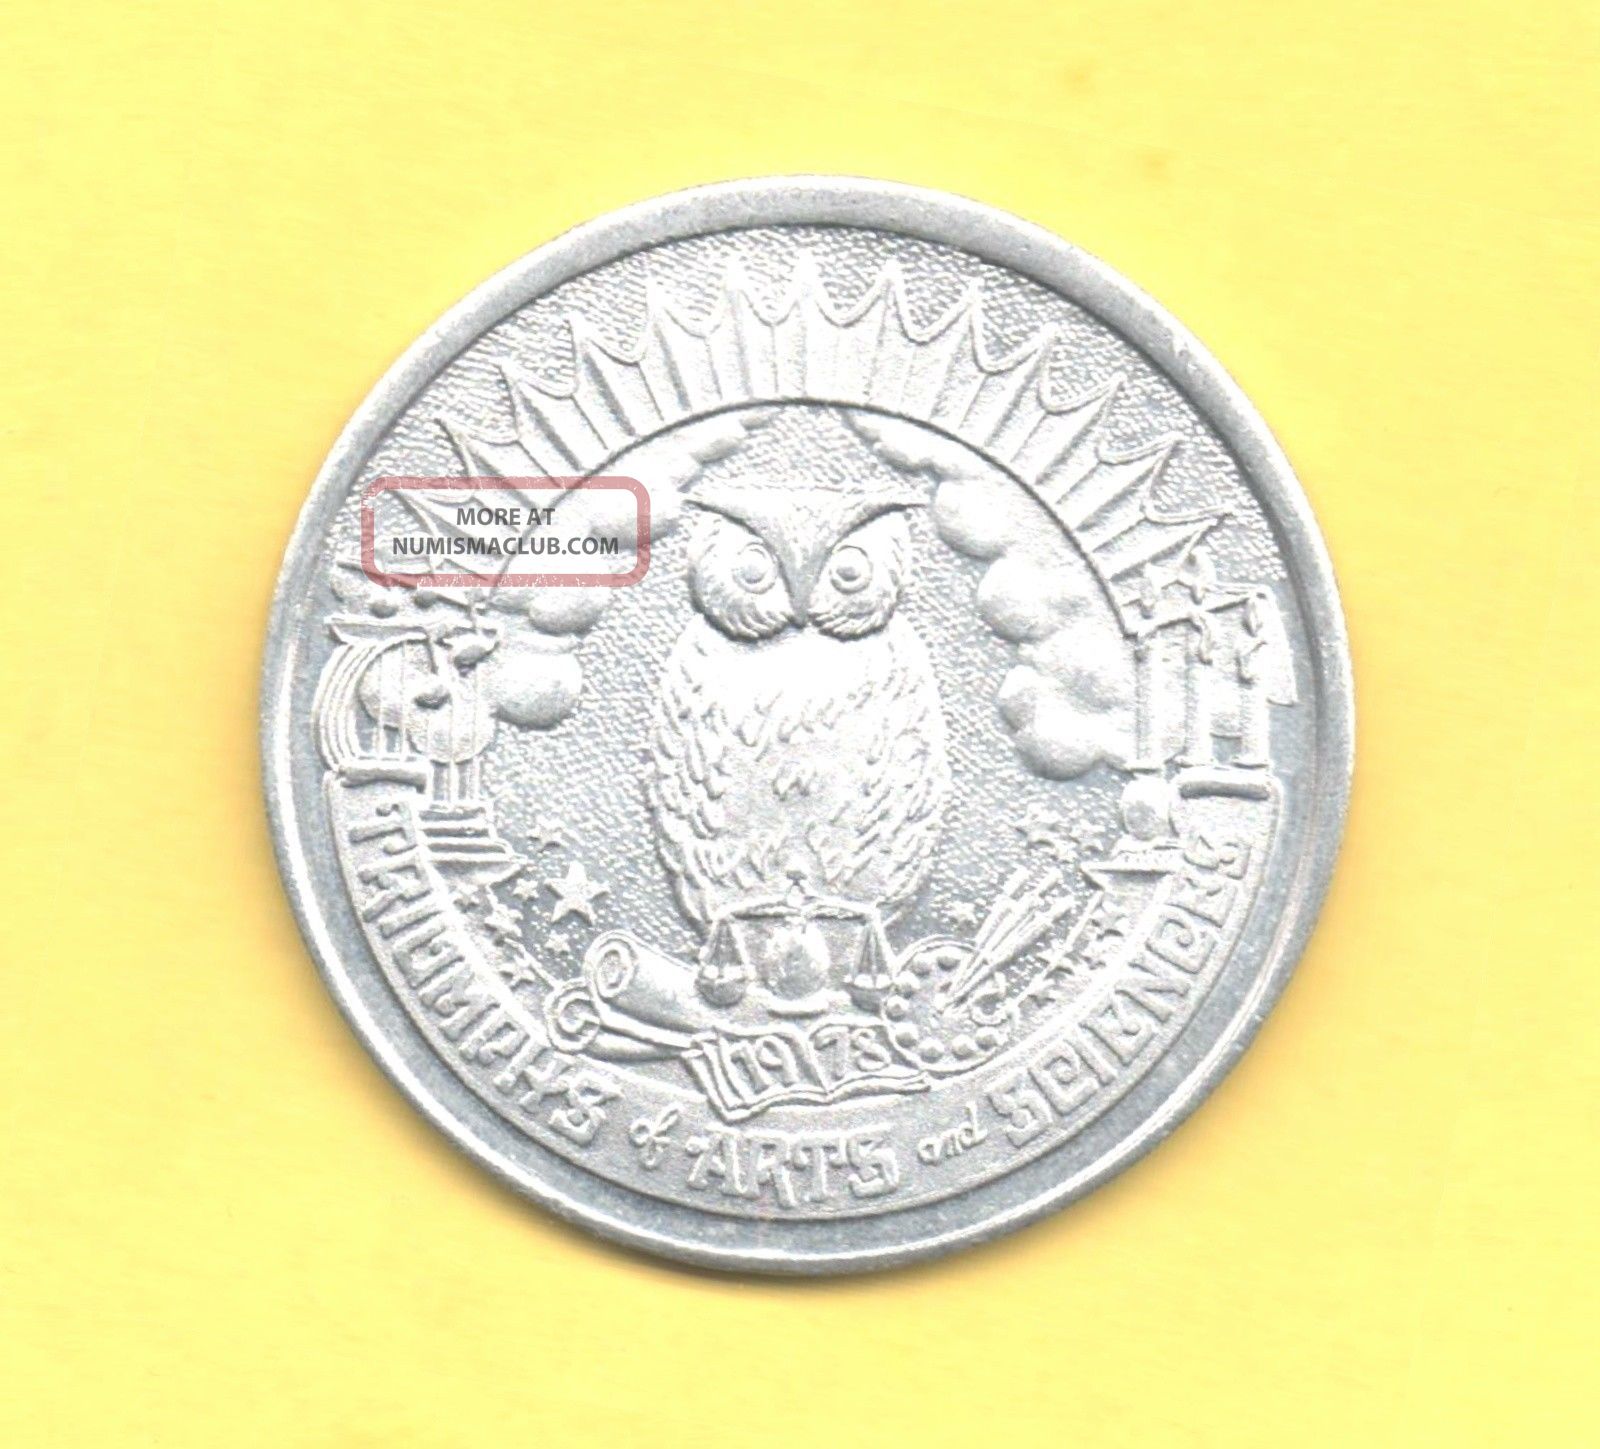 wise-old-owl-token-1978-triumphs-of-arts-and-sciences-coin